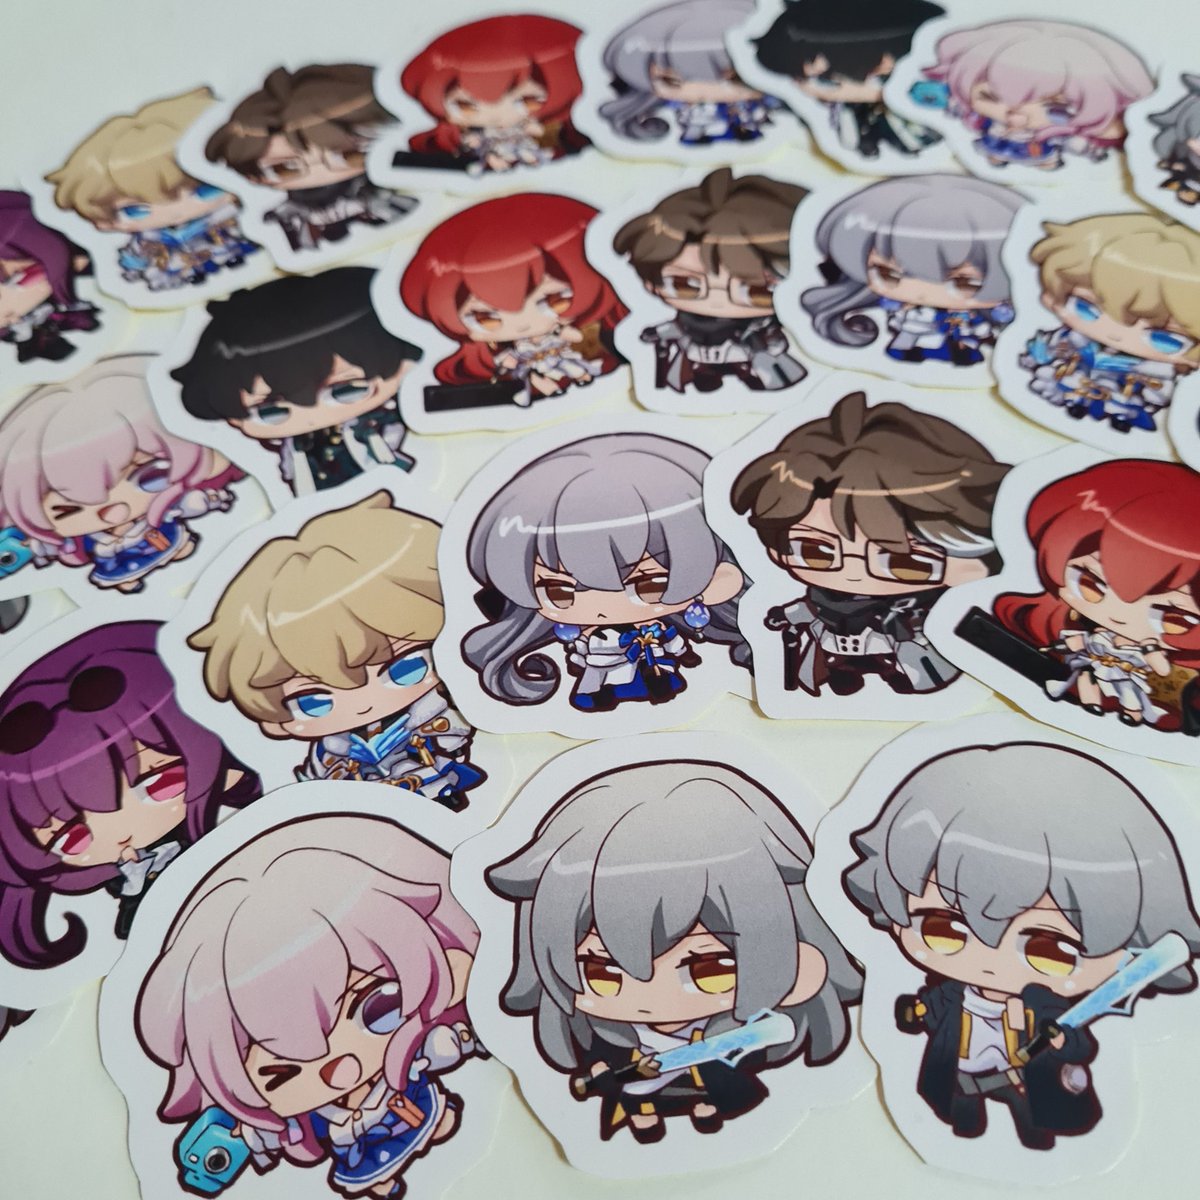 「The stickers are ready~」|Manda💀 @ Prepping for Doujimaのイラスト